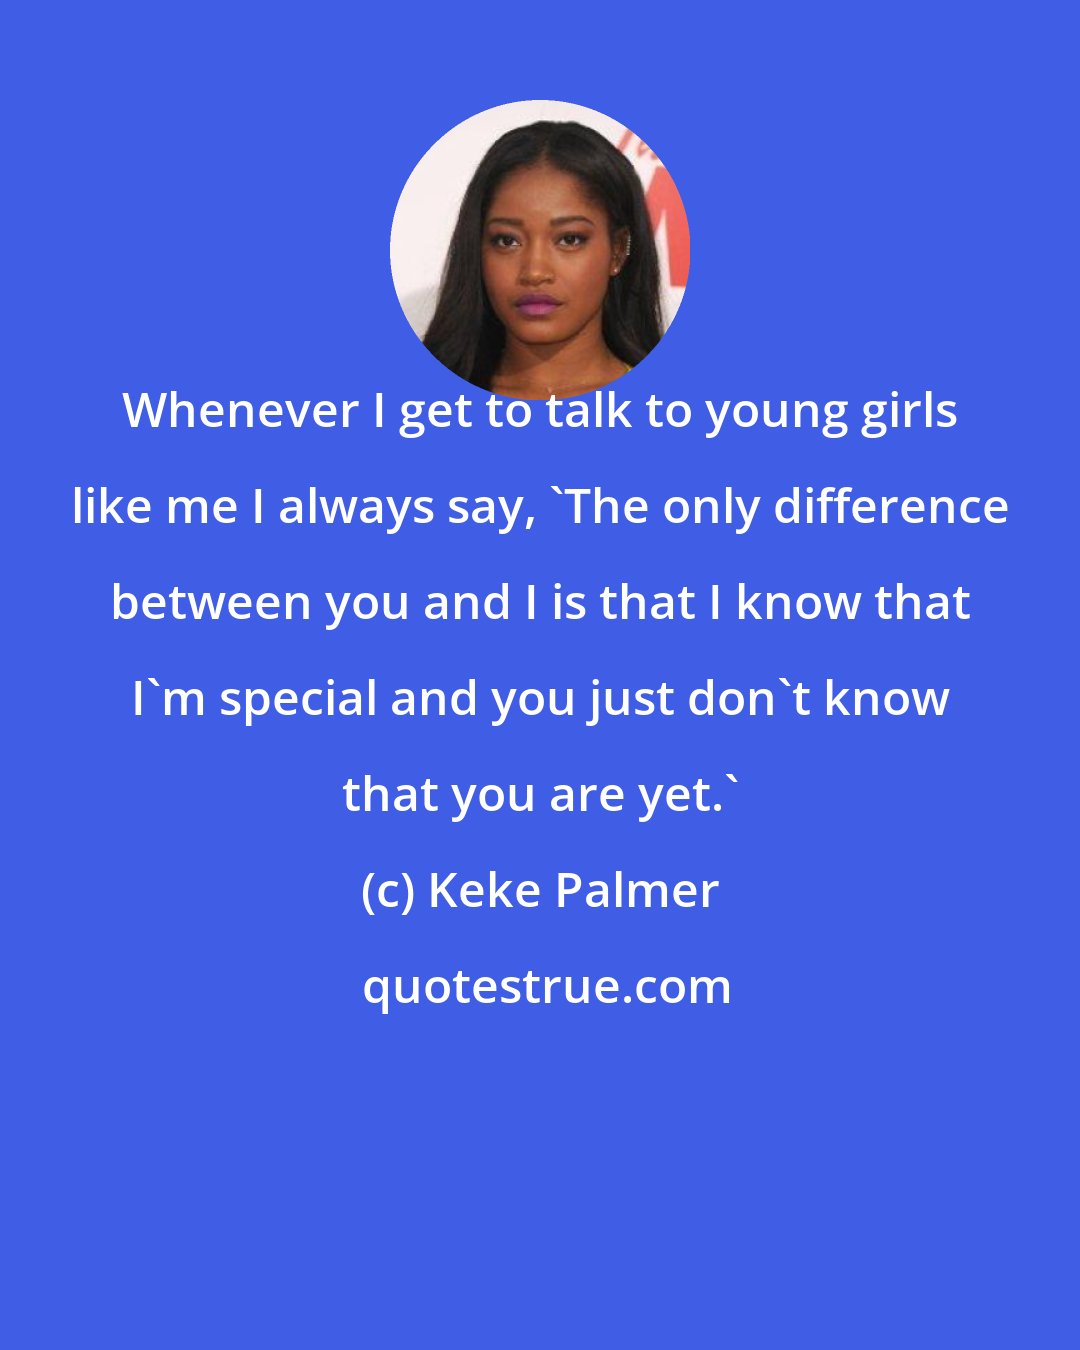 Keke Palmer: Whenever I get to talk to young girls like me I always say, 'The only difference between you and I is that I know that I'm special and you just don't know that you are yet.'